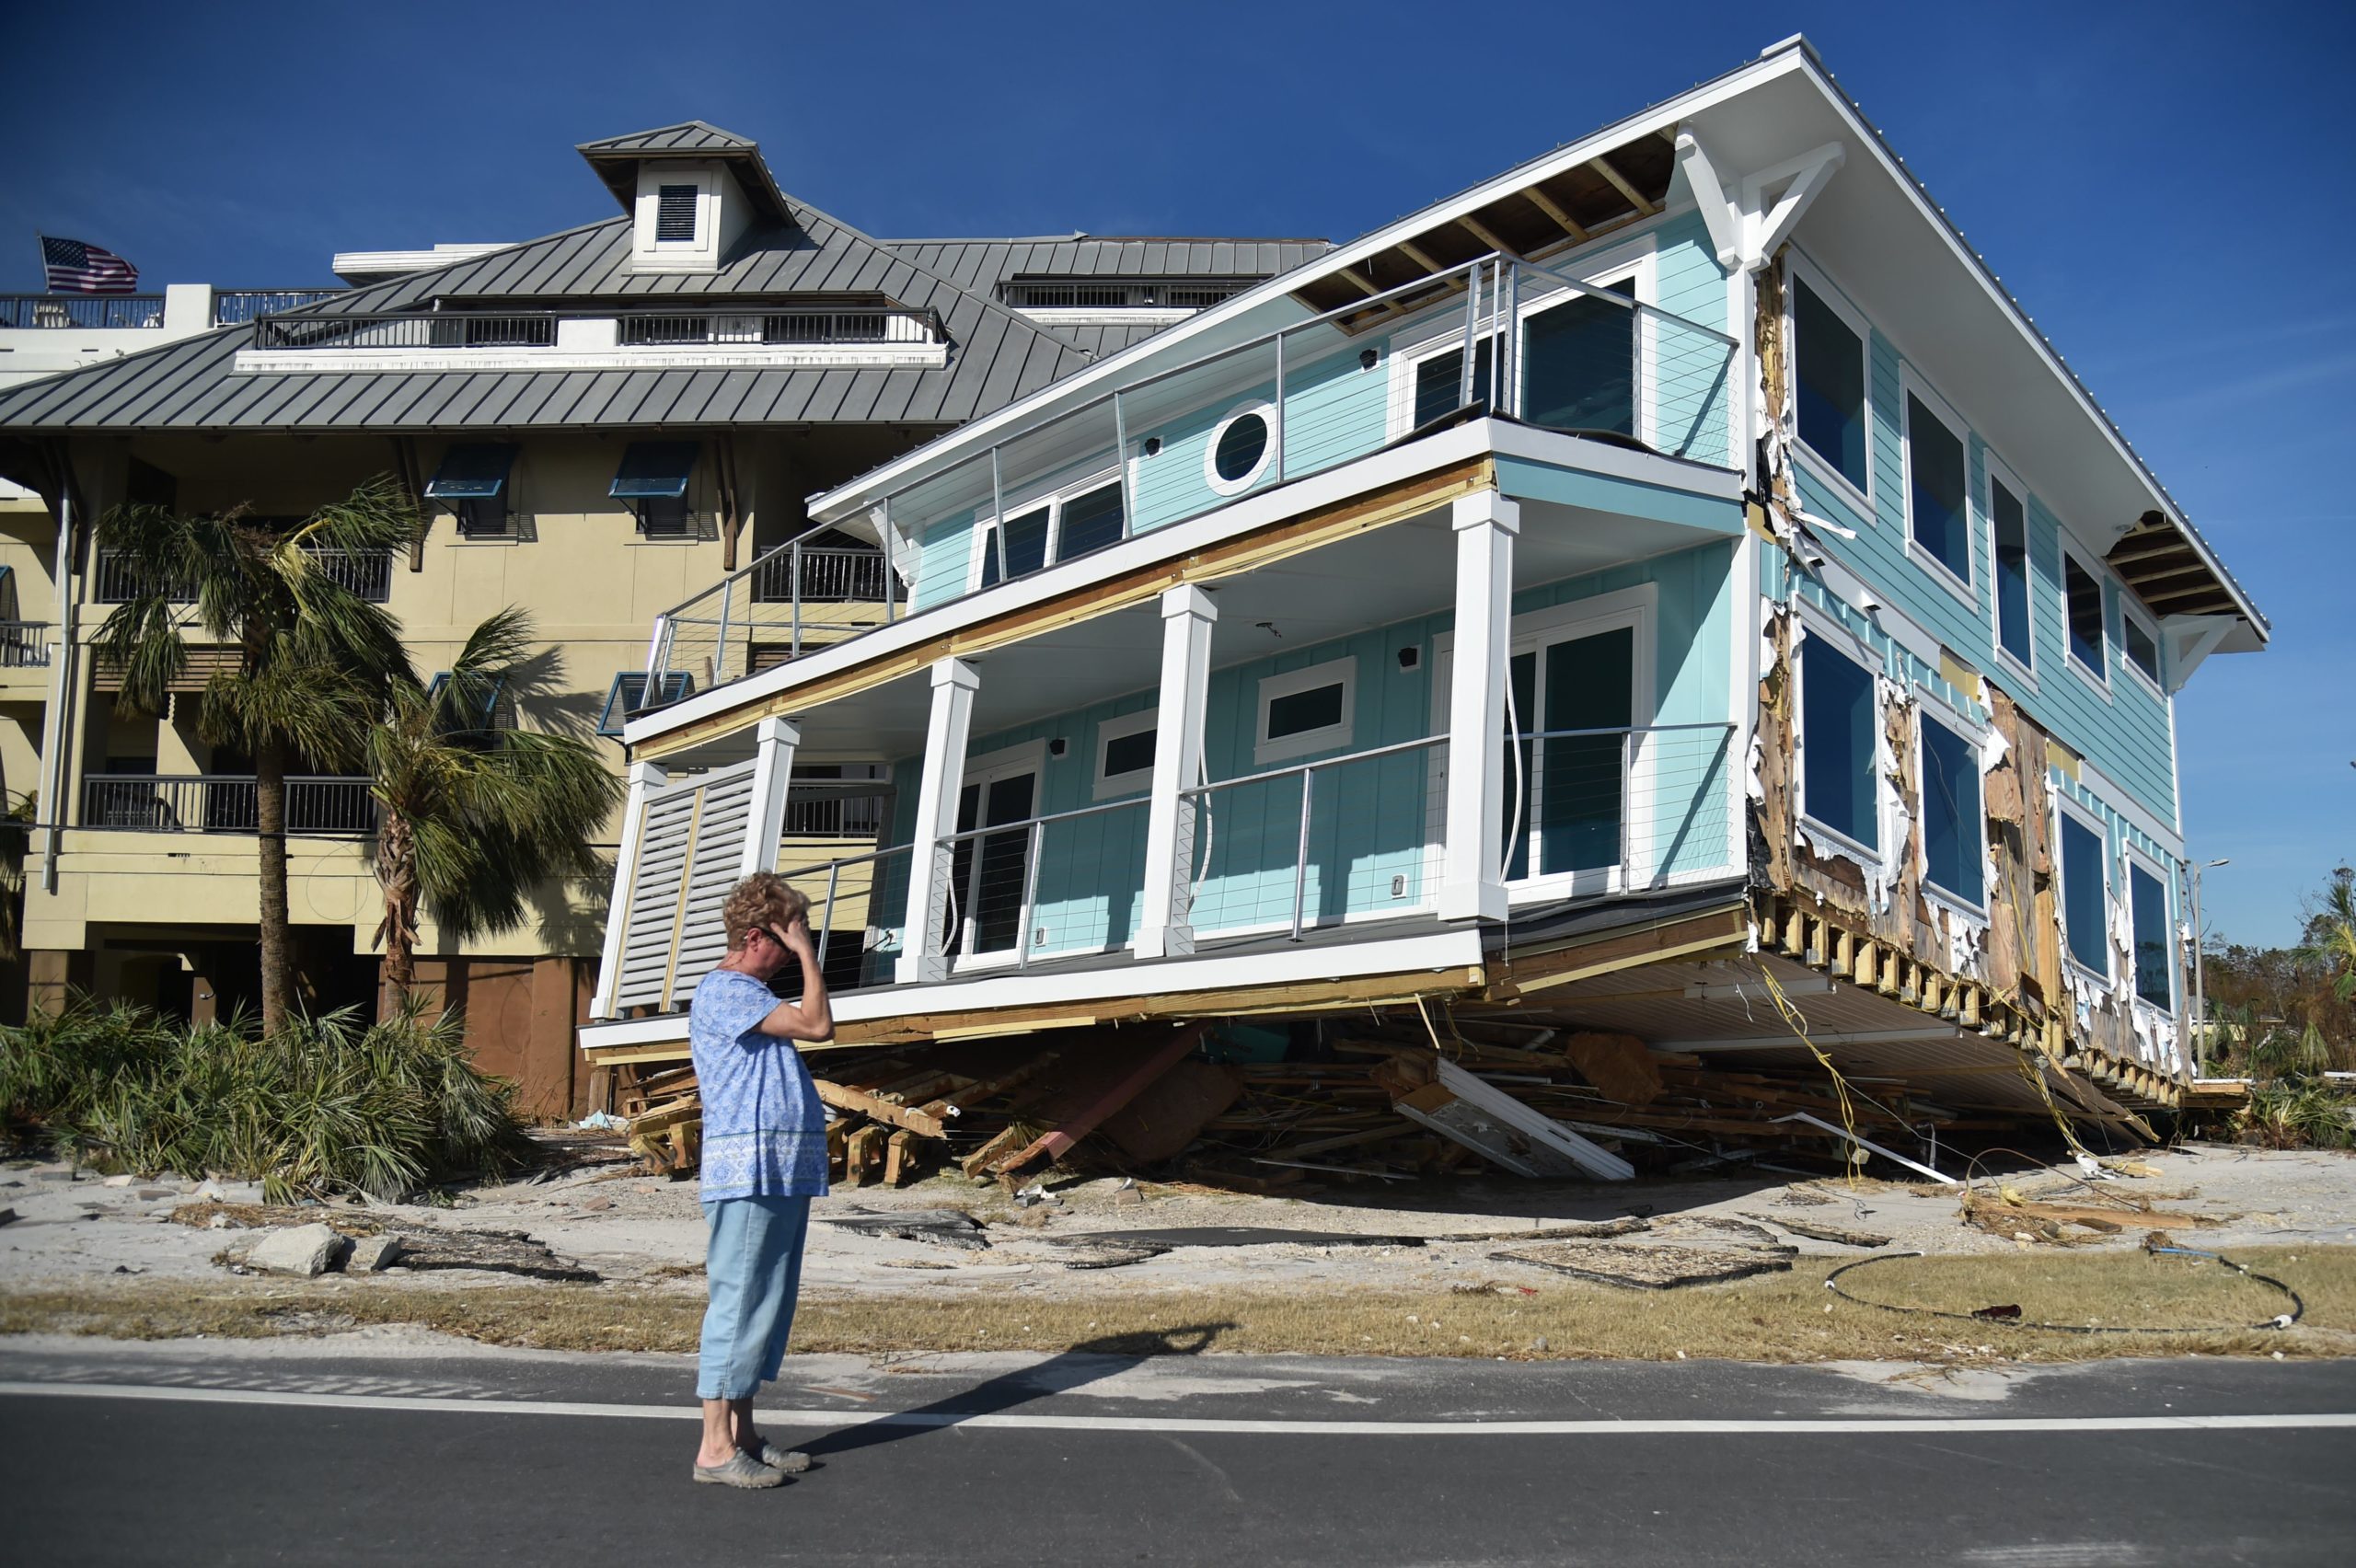 Claire mourns as she sees the damage caused by Hurricane Michael in Mexico Beach, Florida on Oct. 12, 2018. (Photo: Hector Retamal/AFP, Getty Images)